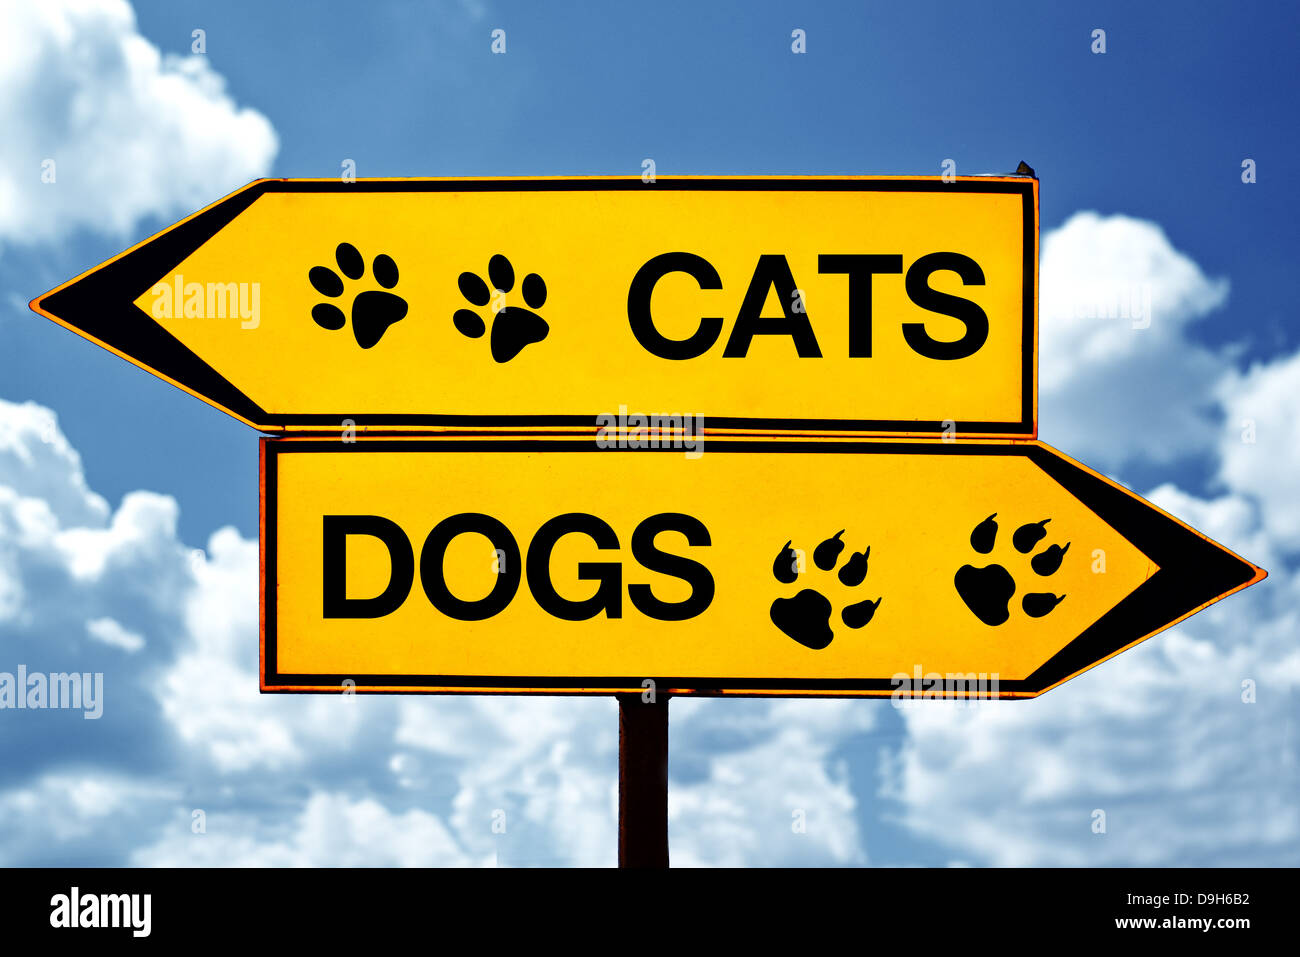 Cats or dogs, opposite signs. Two opposite signs against blue sky background. Stock Photo